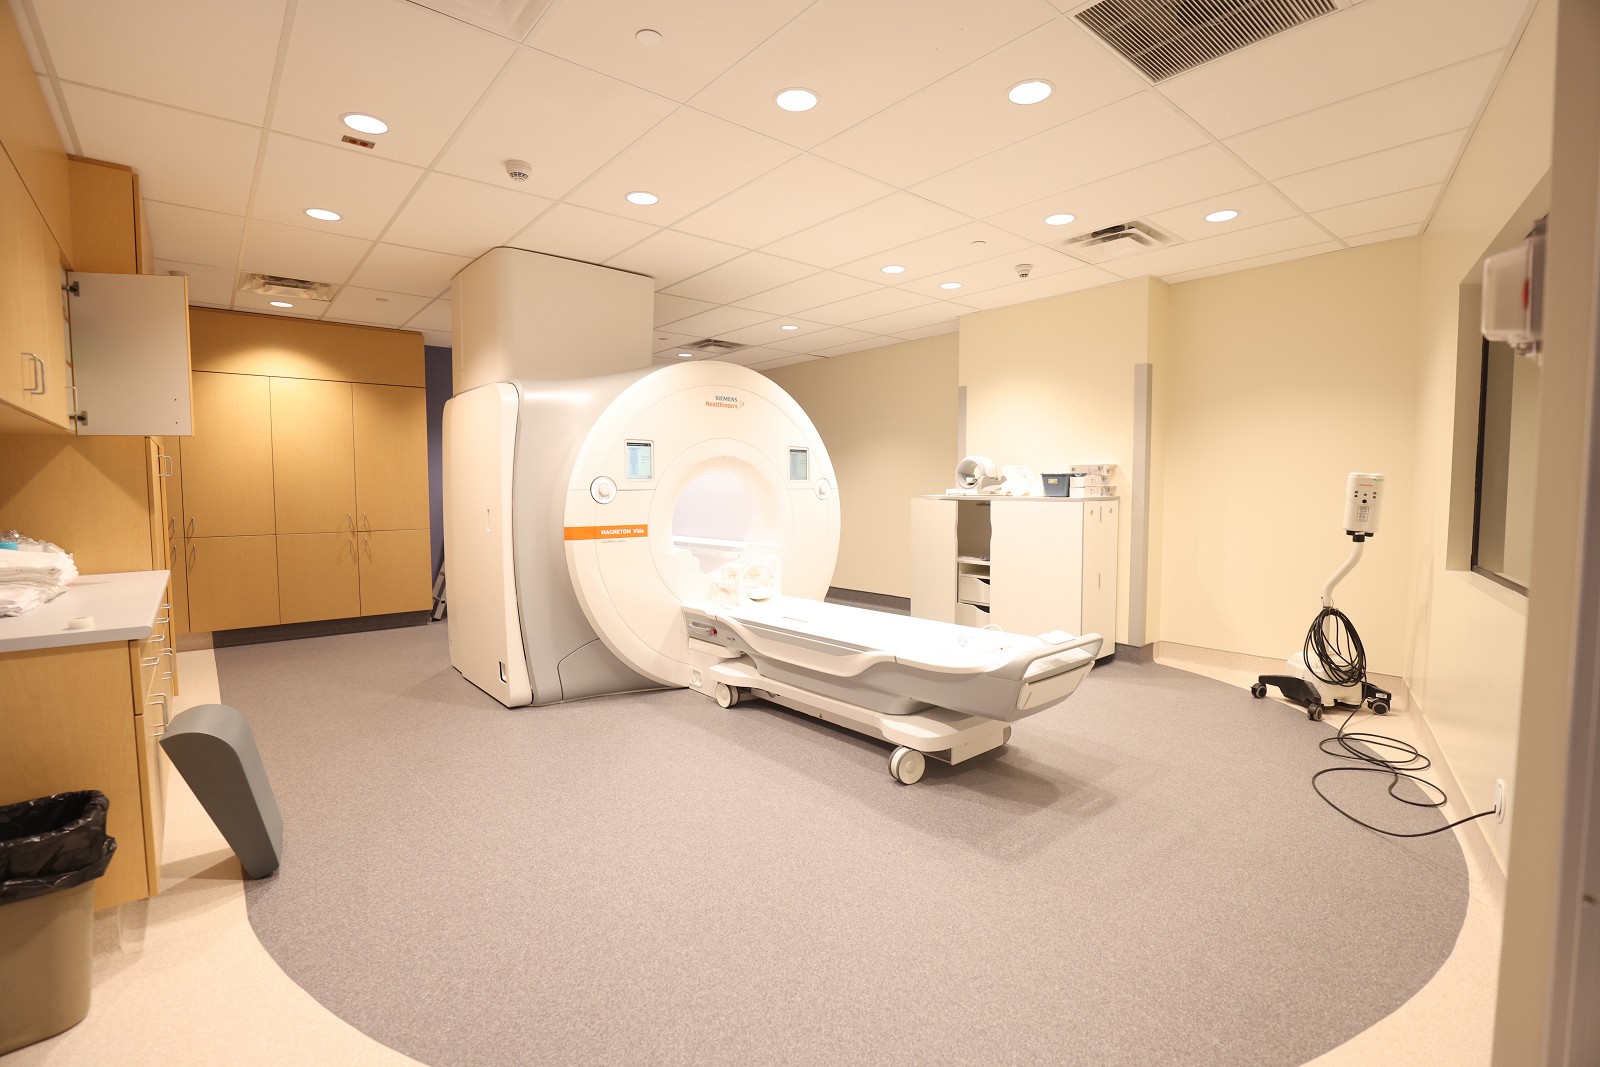 New 3T MRI Provides Countless New Imaging Opportunities